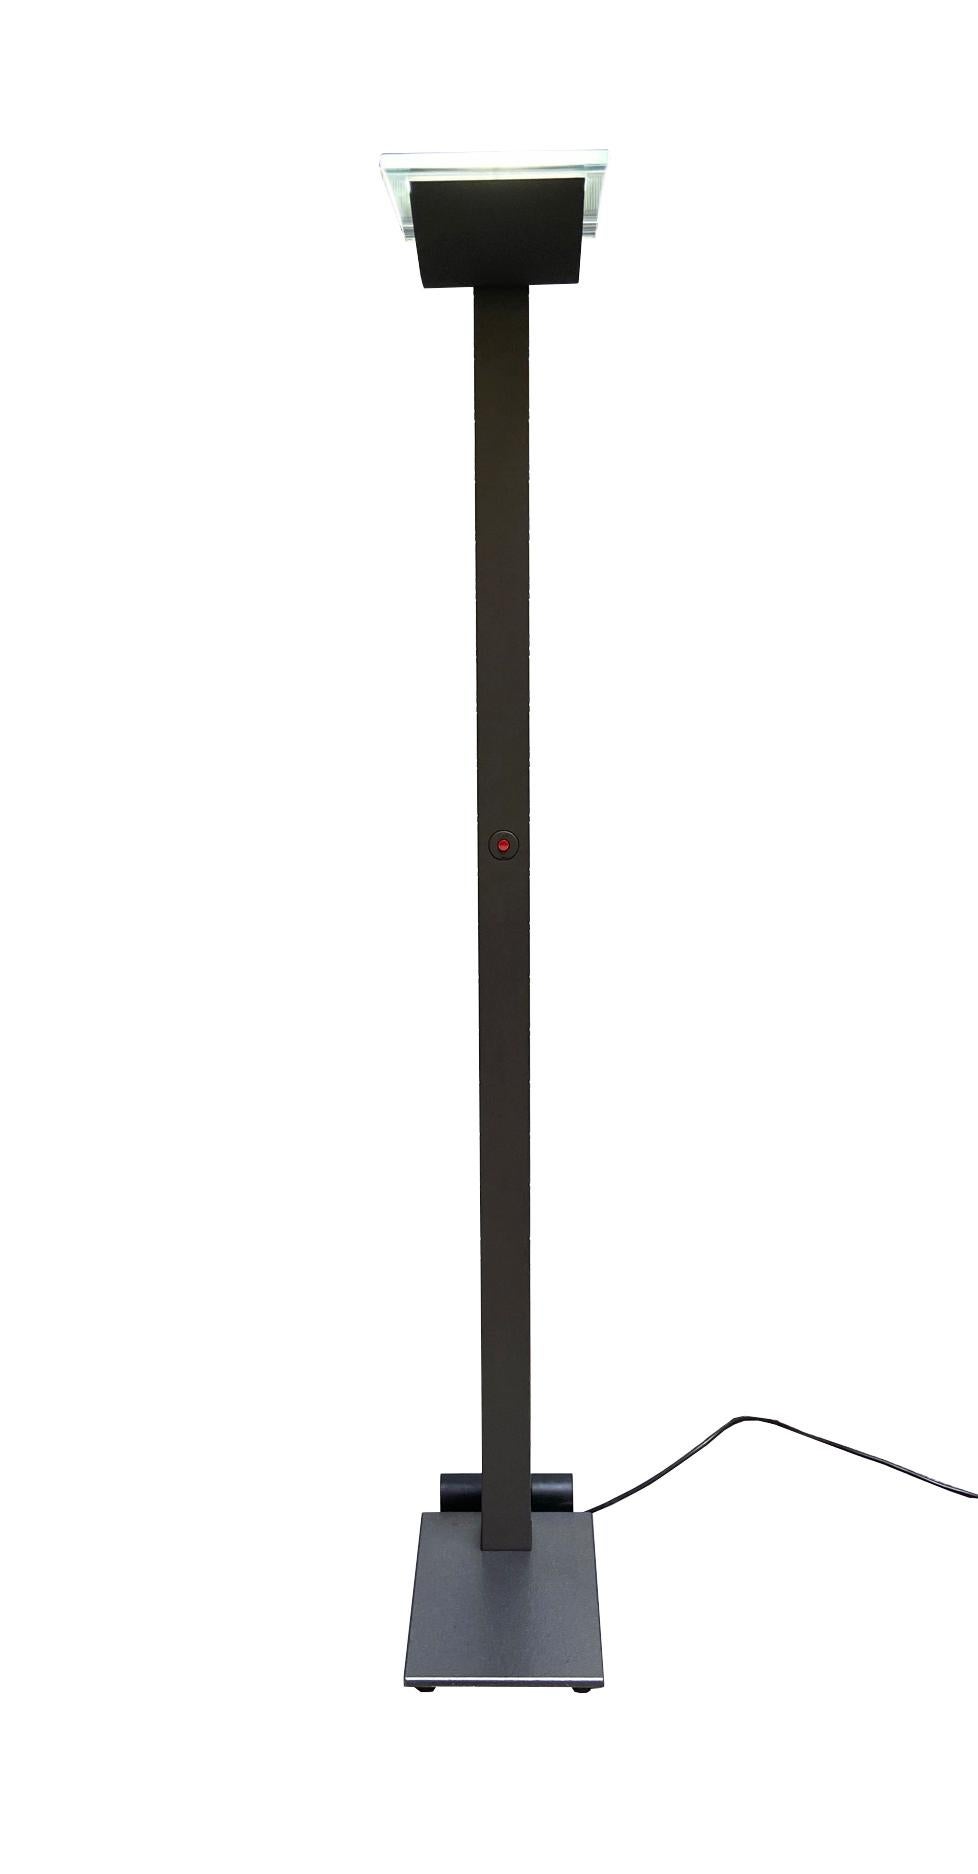 This floor lamp was designed by Ettore Sottsass in the 1980s. This Ettore Sottsass floor lamp model ID-S is produced by the Italian company Staff. The floor lamp has black in color. The lamp is equipped with a swivel filter cap. Ettore Sottsass was